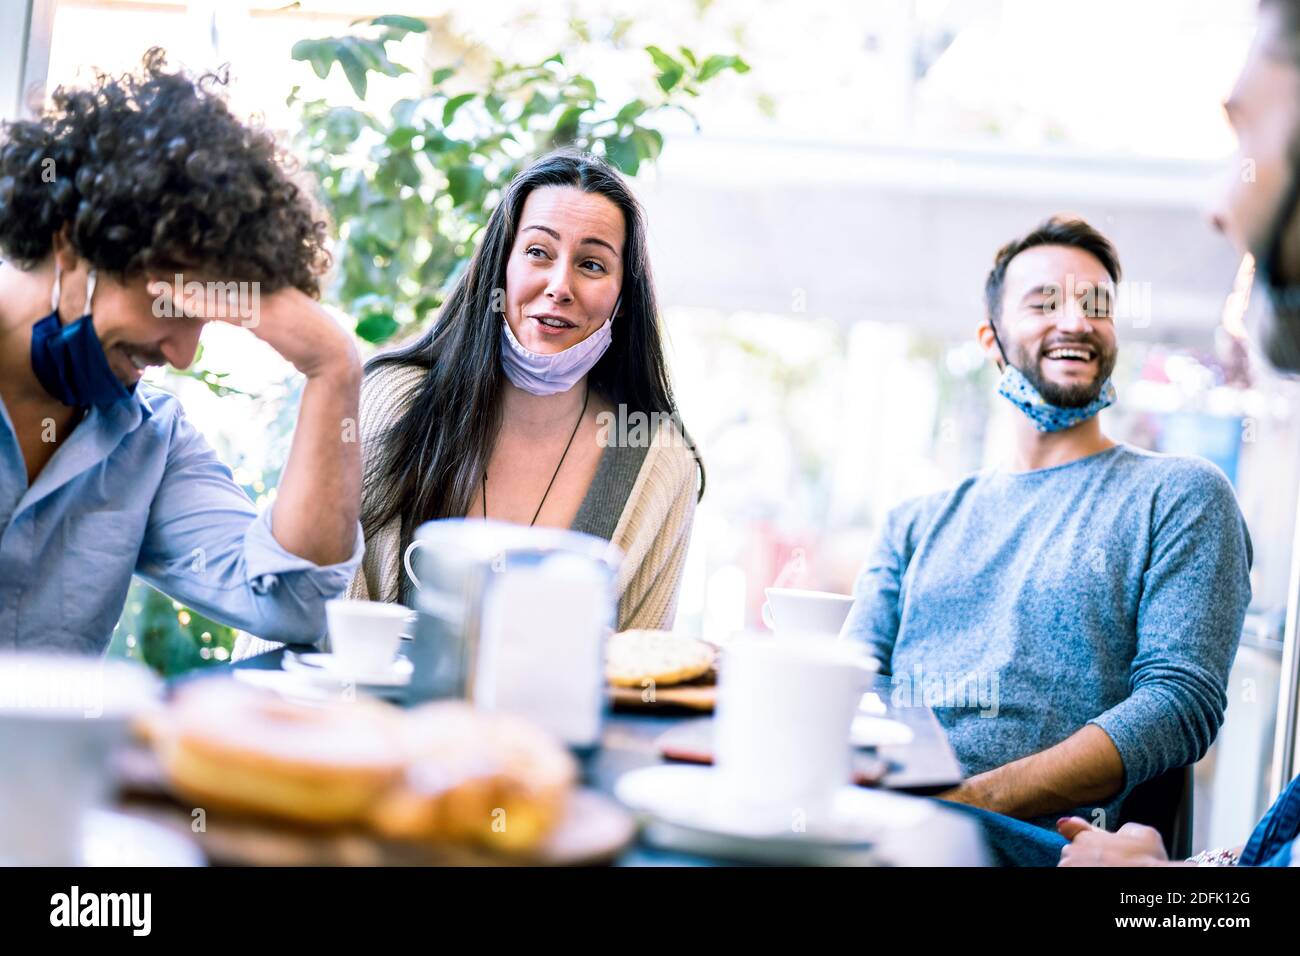 Friends having fun talking at coffeeshop - Young milenial people socializing together at restaurant cafeteria - New normal lifestyle concept Stock Photo